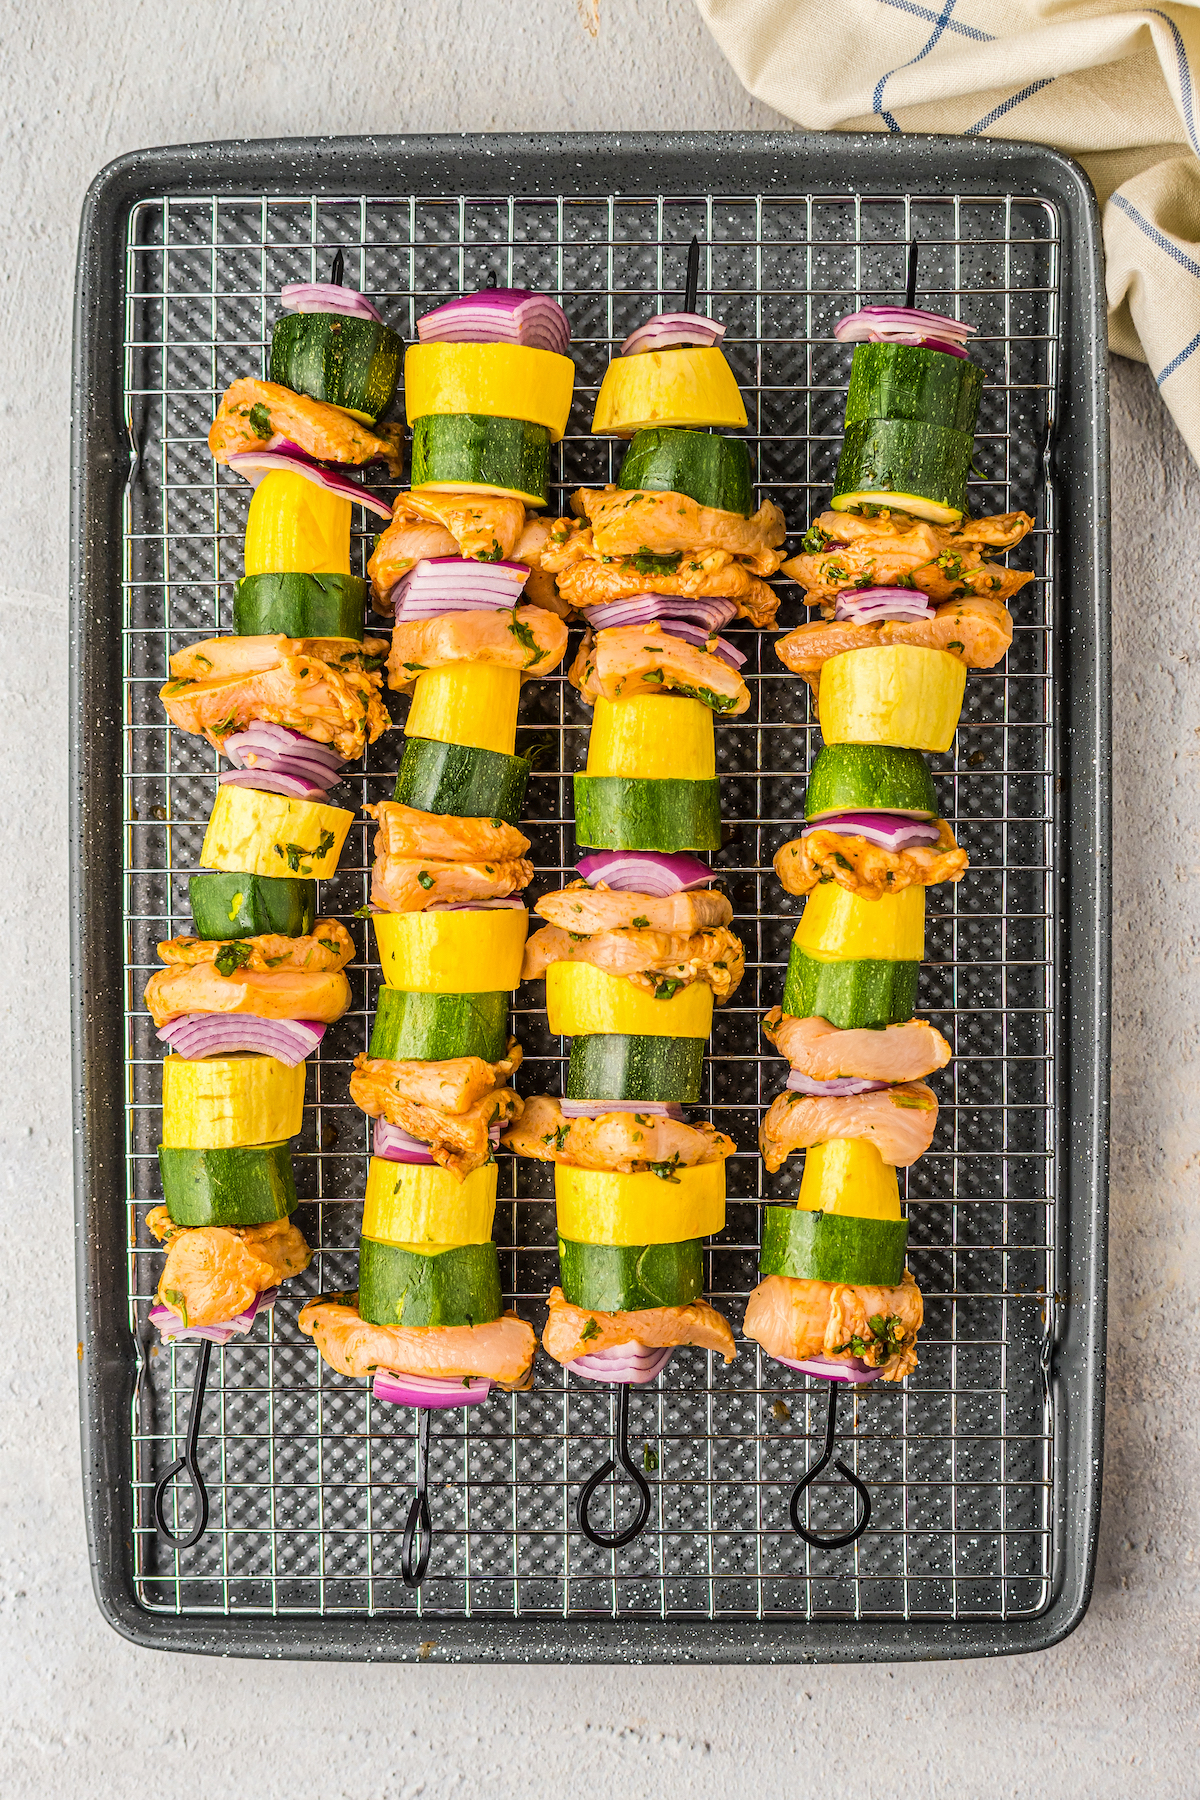 Un-grilled chicken kabobs on a tray.